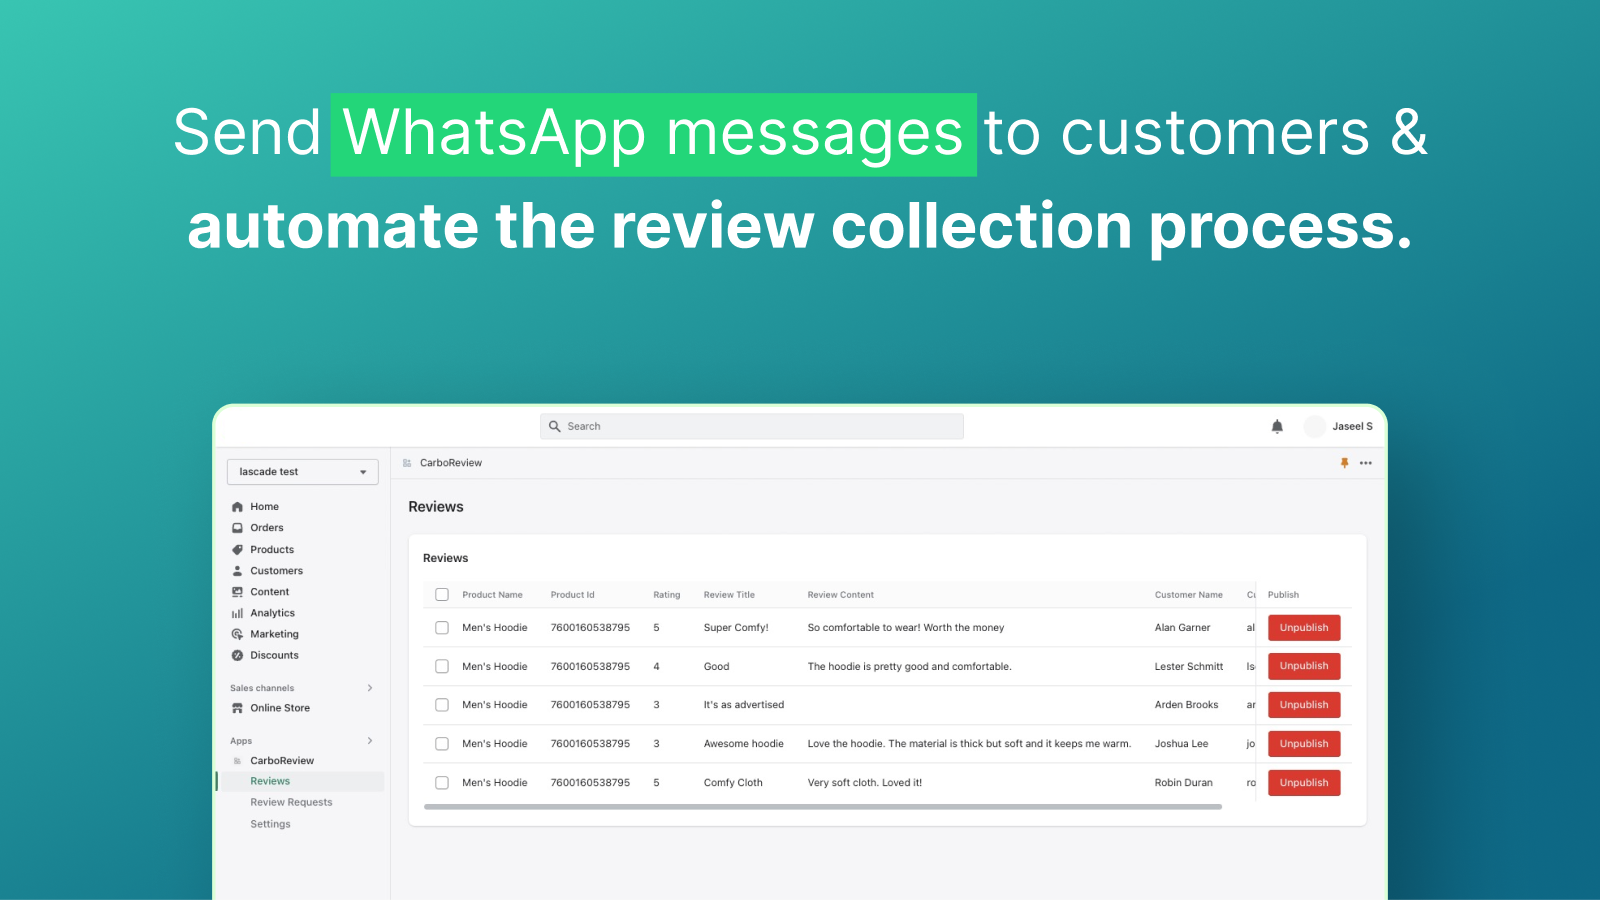 Automate the review collection process through WhatsApp